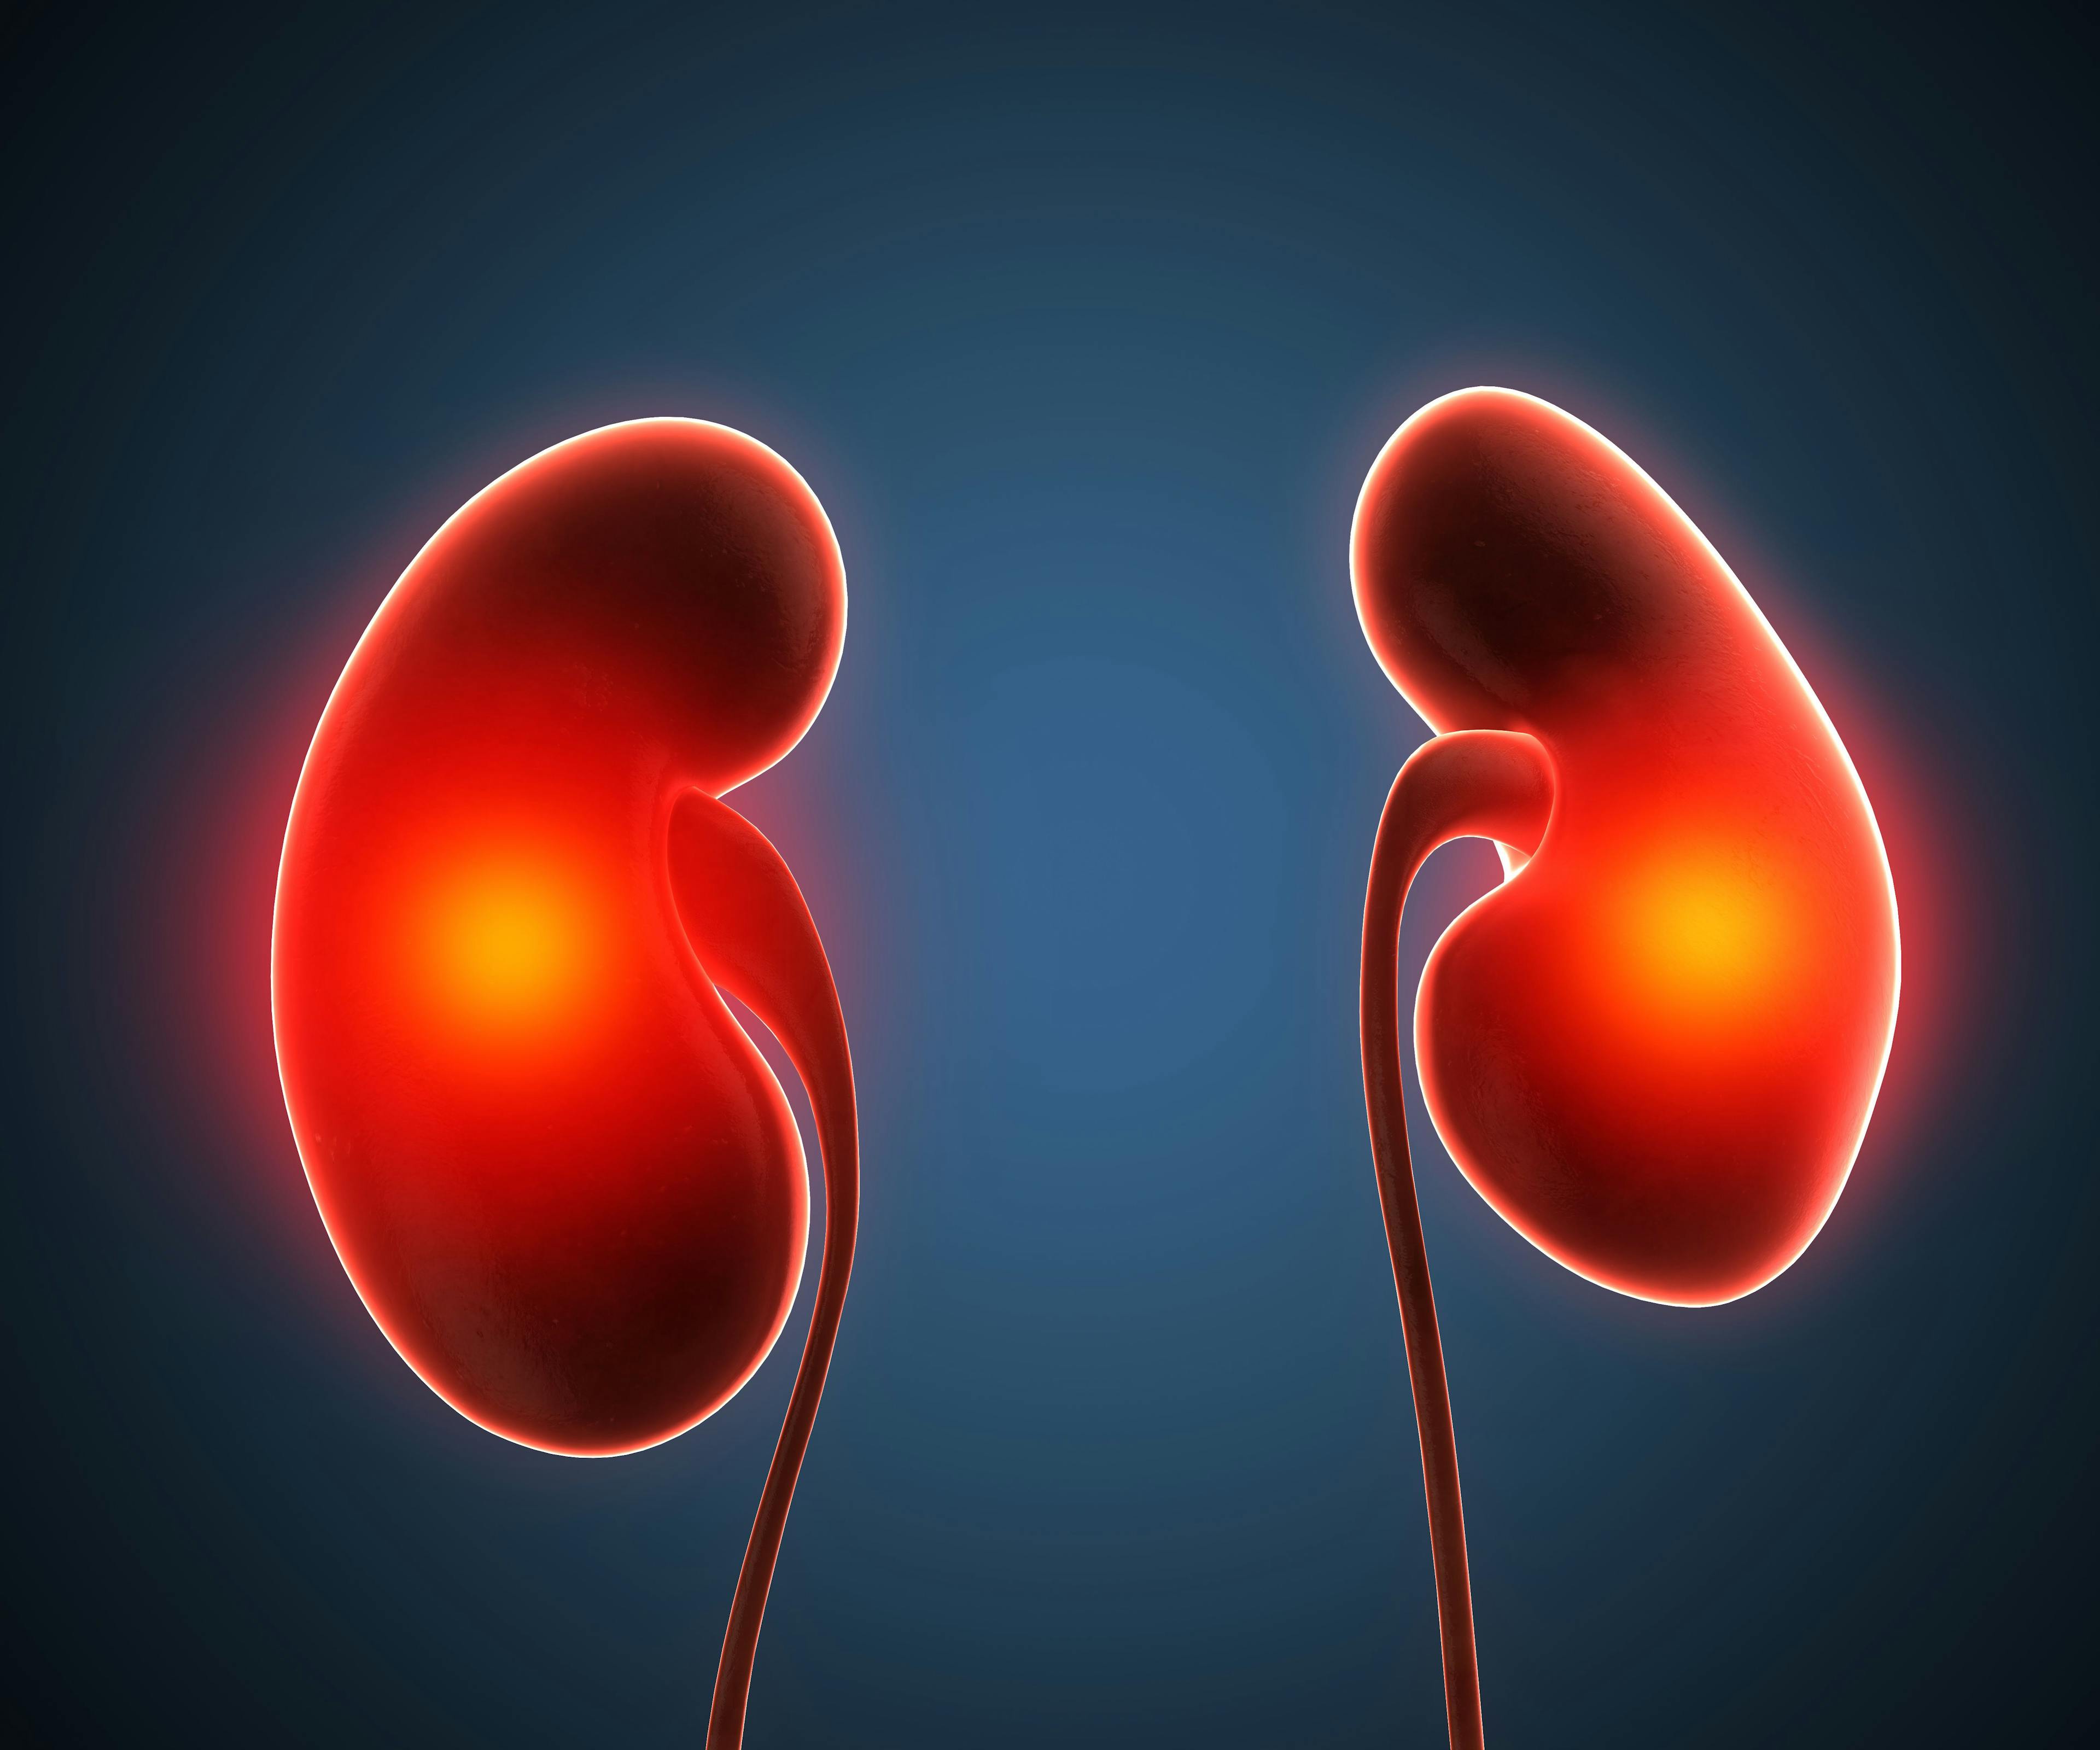 Radiation Therapy May Give Patients With Kidney Cancer Subtype a ‘Level of Comfort’